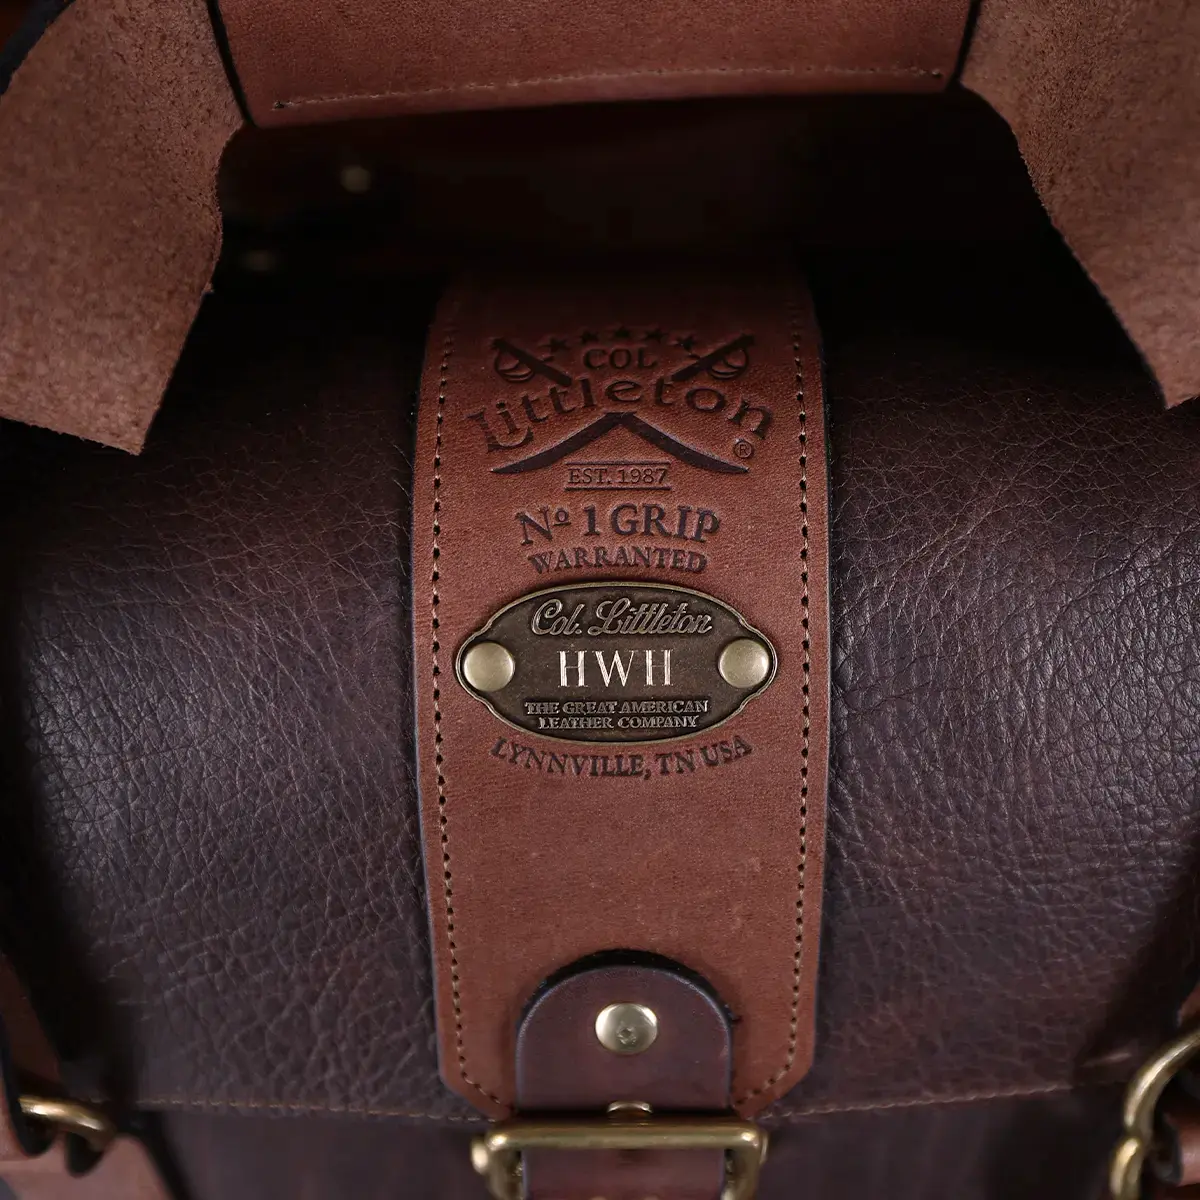 leather no 1 grip travel bag in tobacco brown american buffalo showing the brass plate